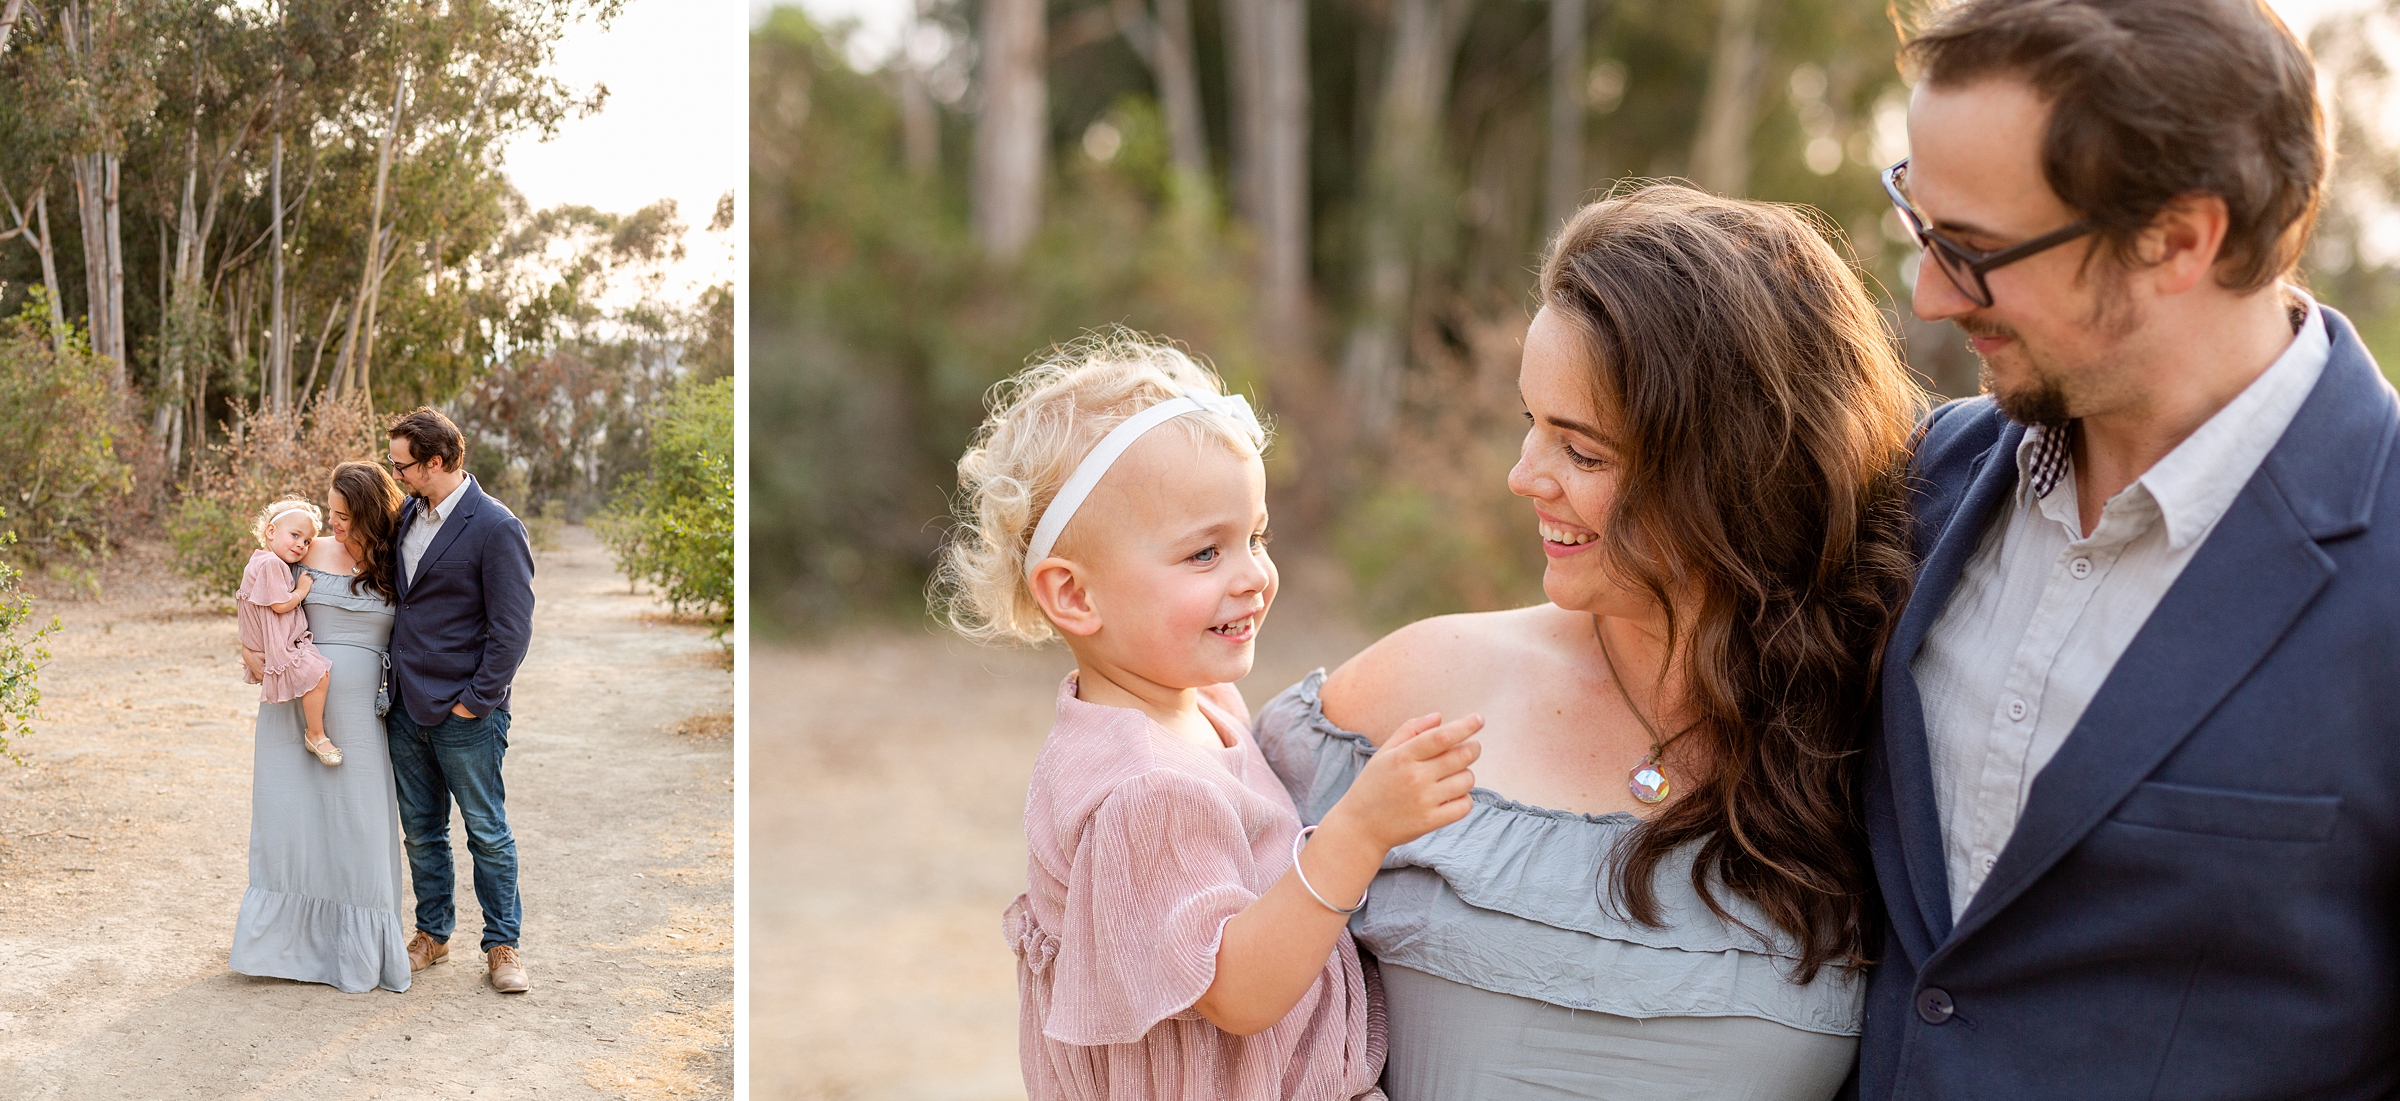 outdoor maternity photos at Los Angeles nature trail